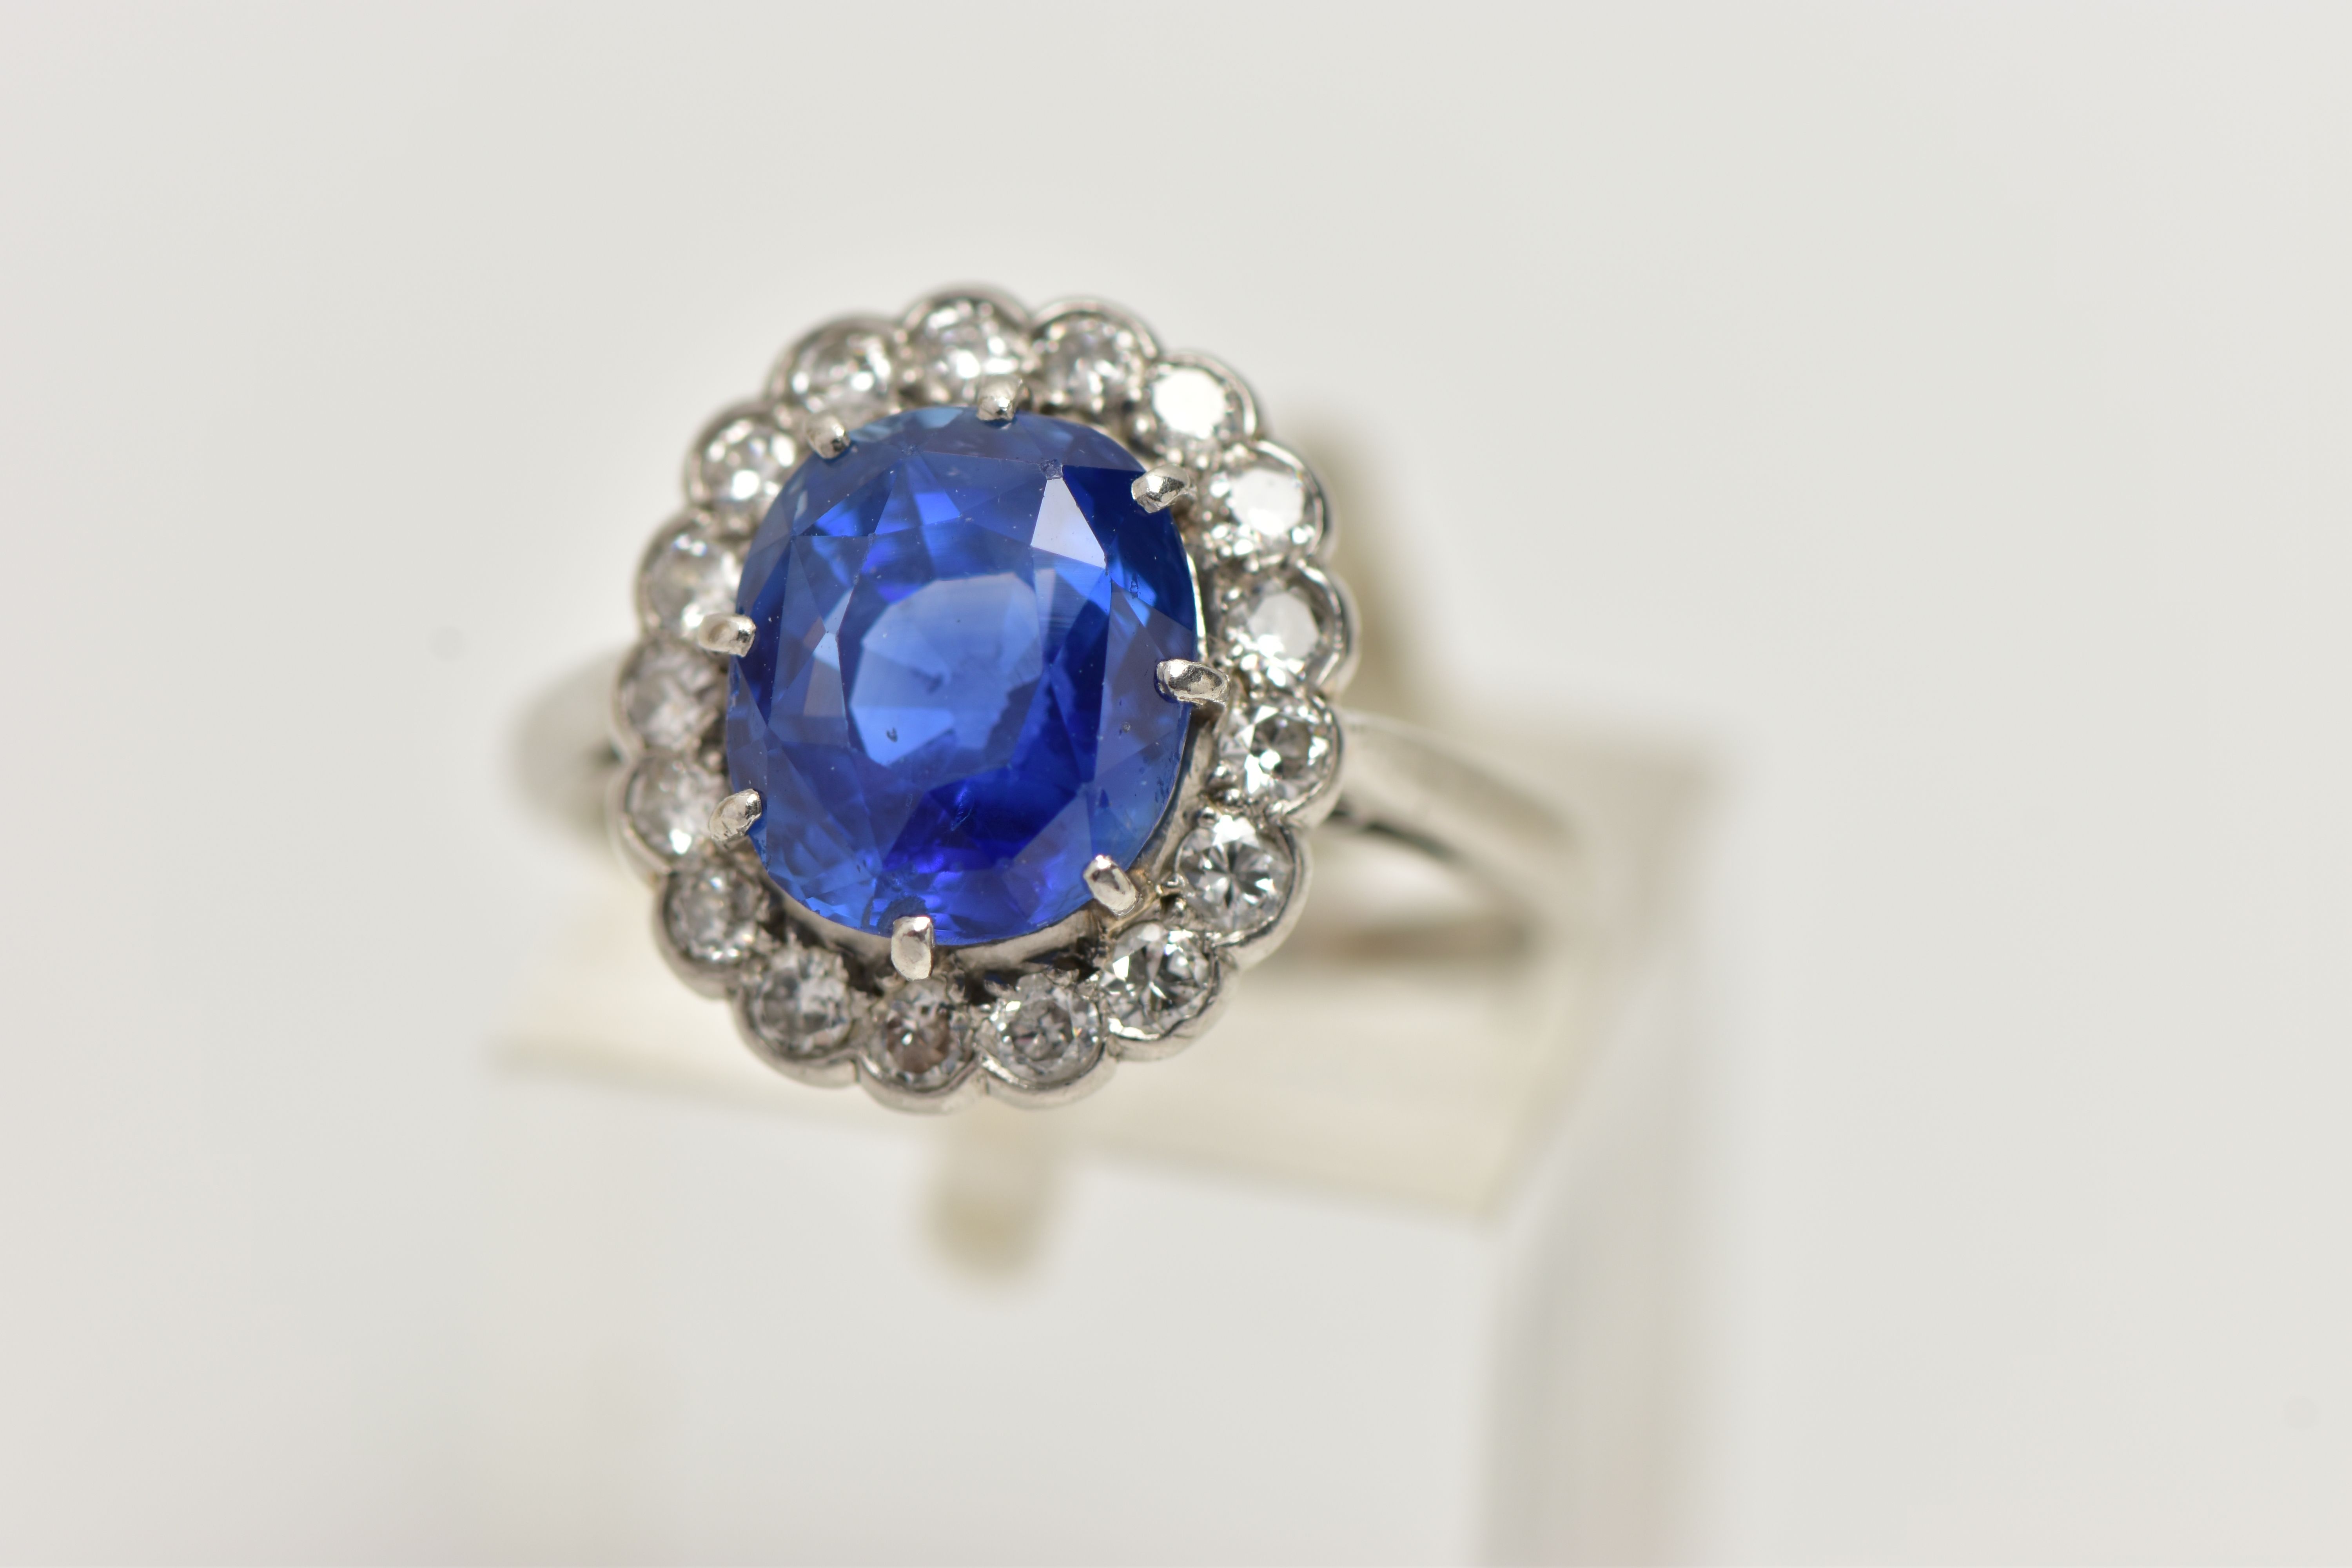 A SAPPHIRE AND DIAMOND CLUSTER RING, set with a mixed cut, cushion sapphire, measuring approximately